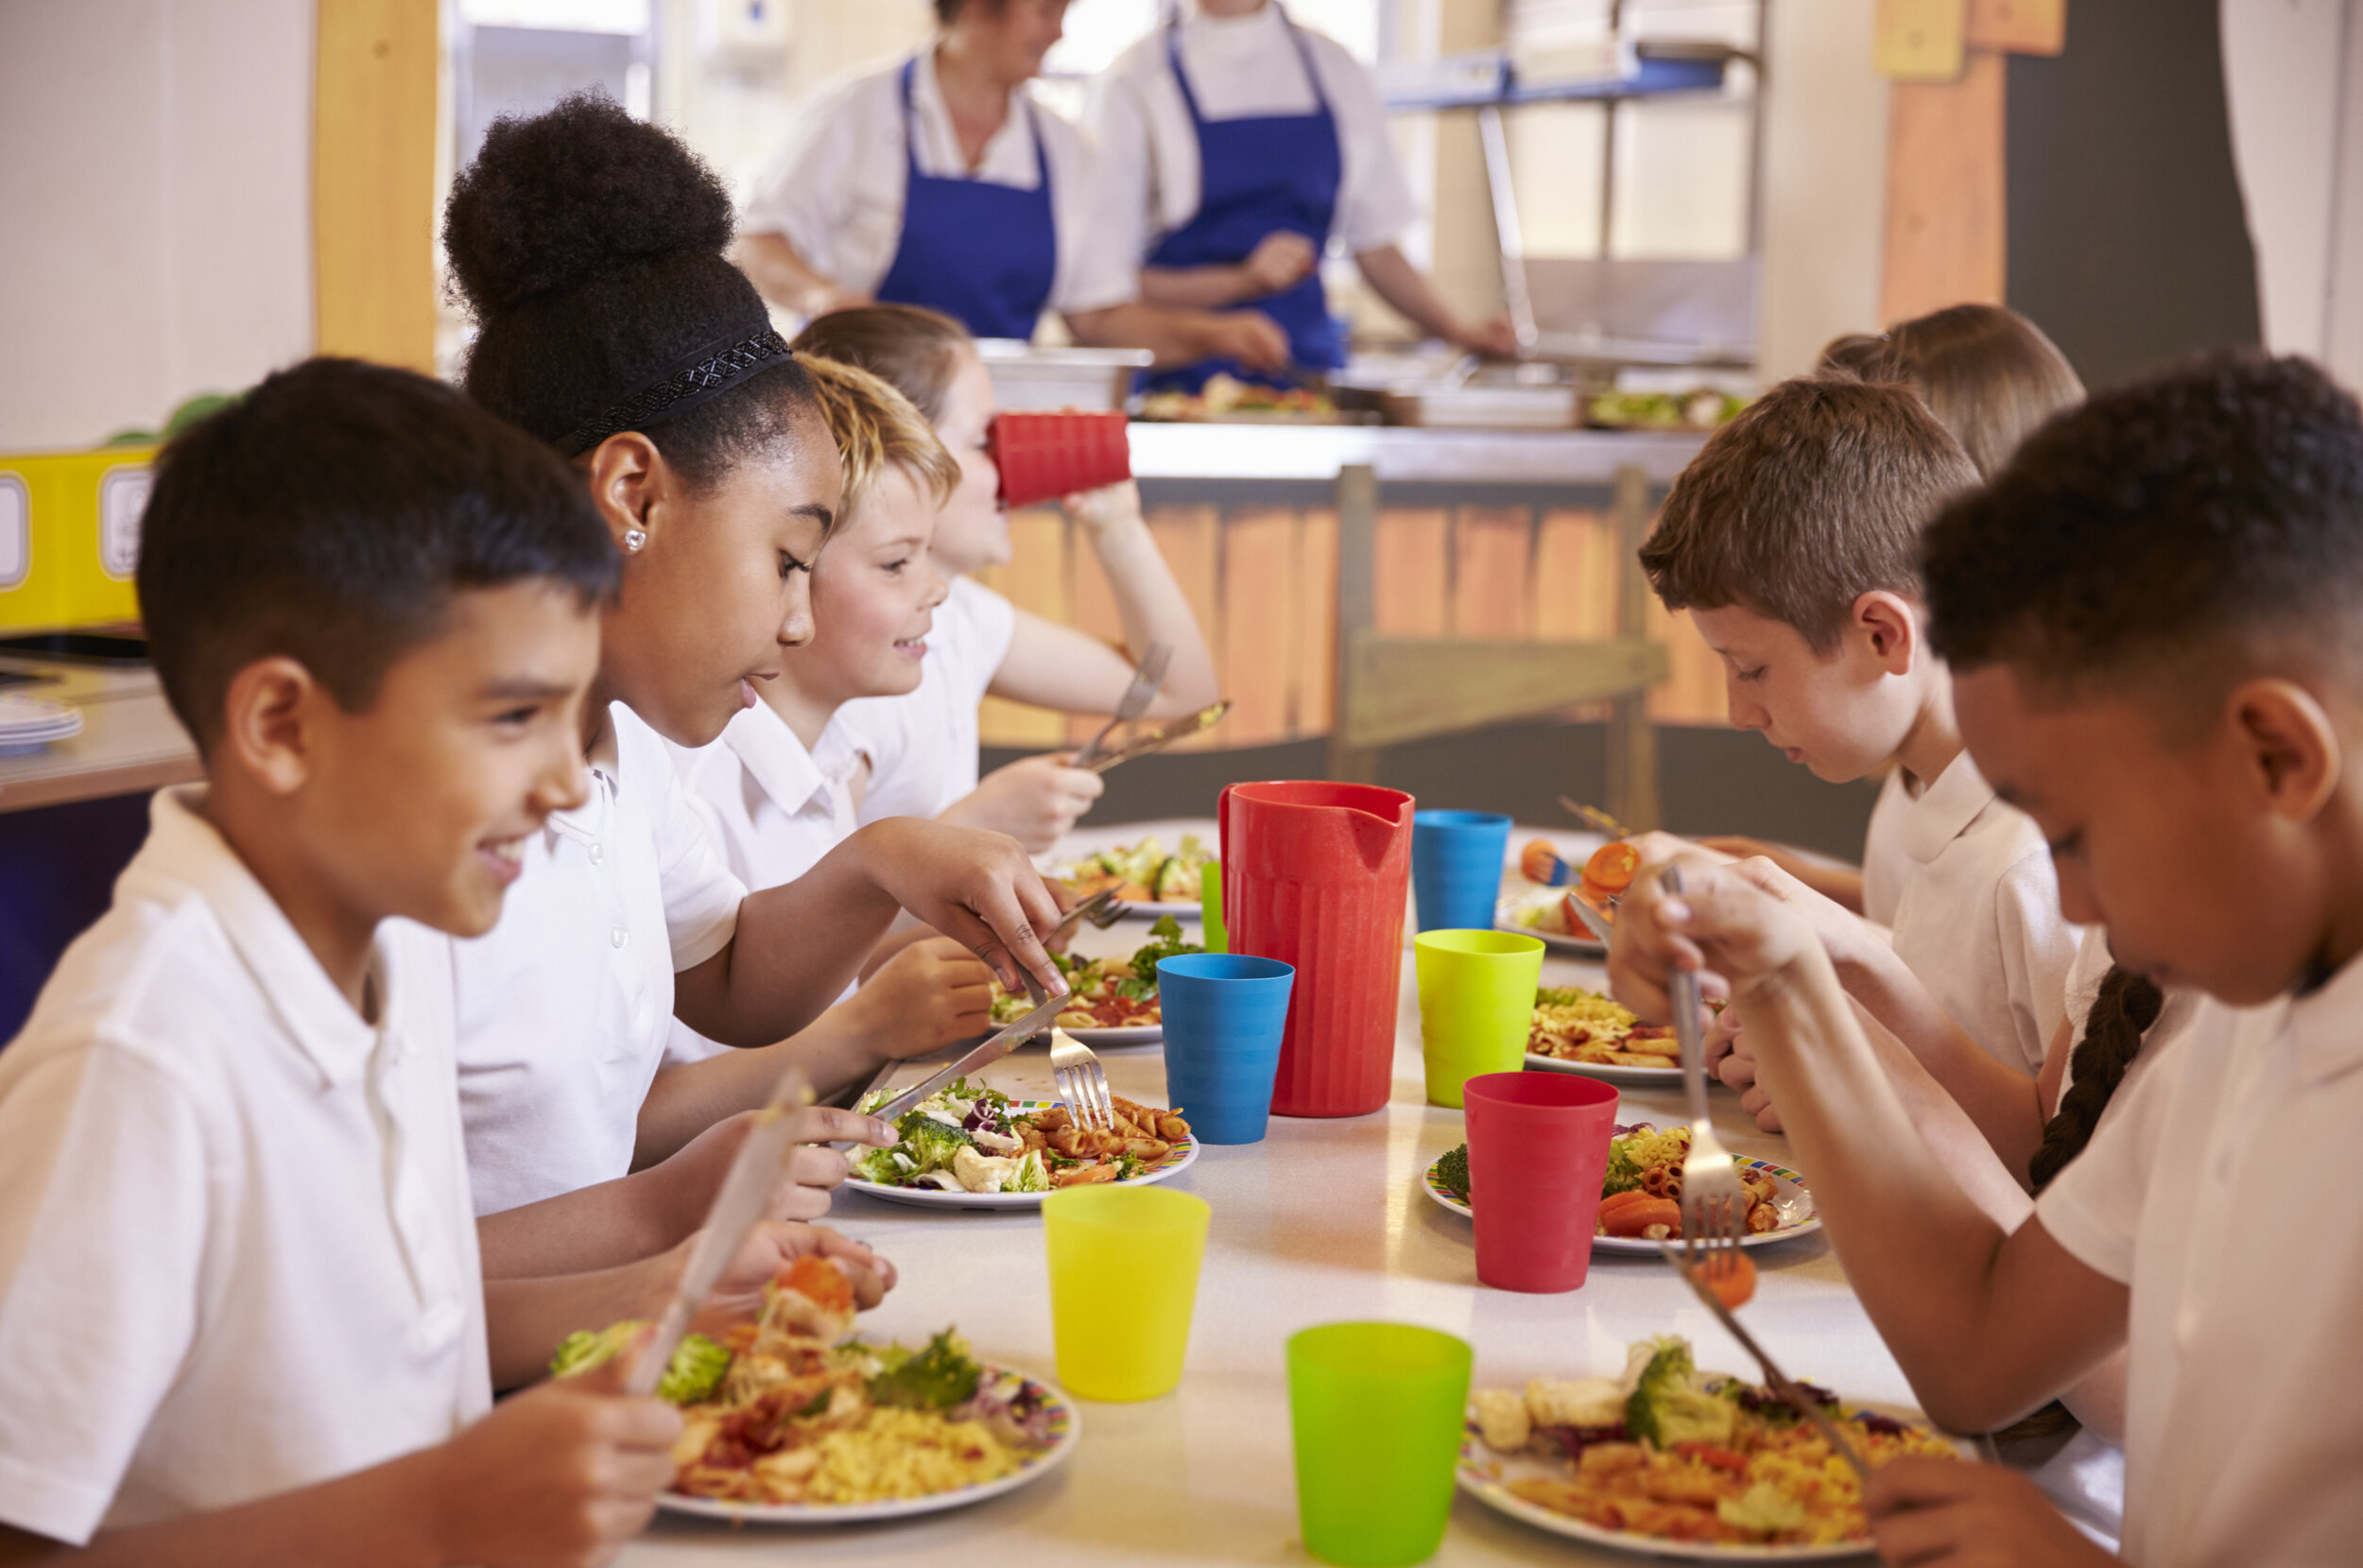 Social distancing measures will likely eliminate the Cafeteria School Experience.